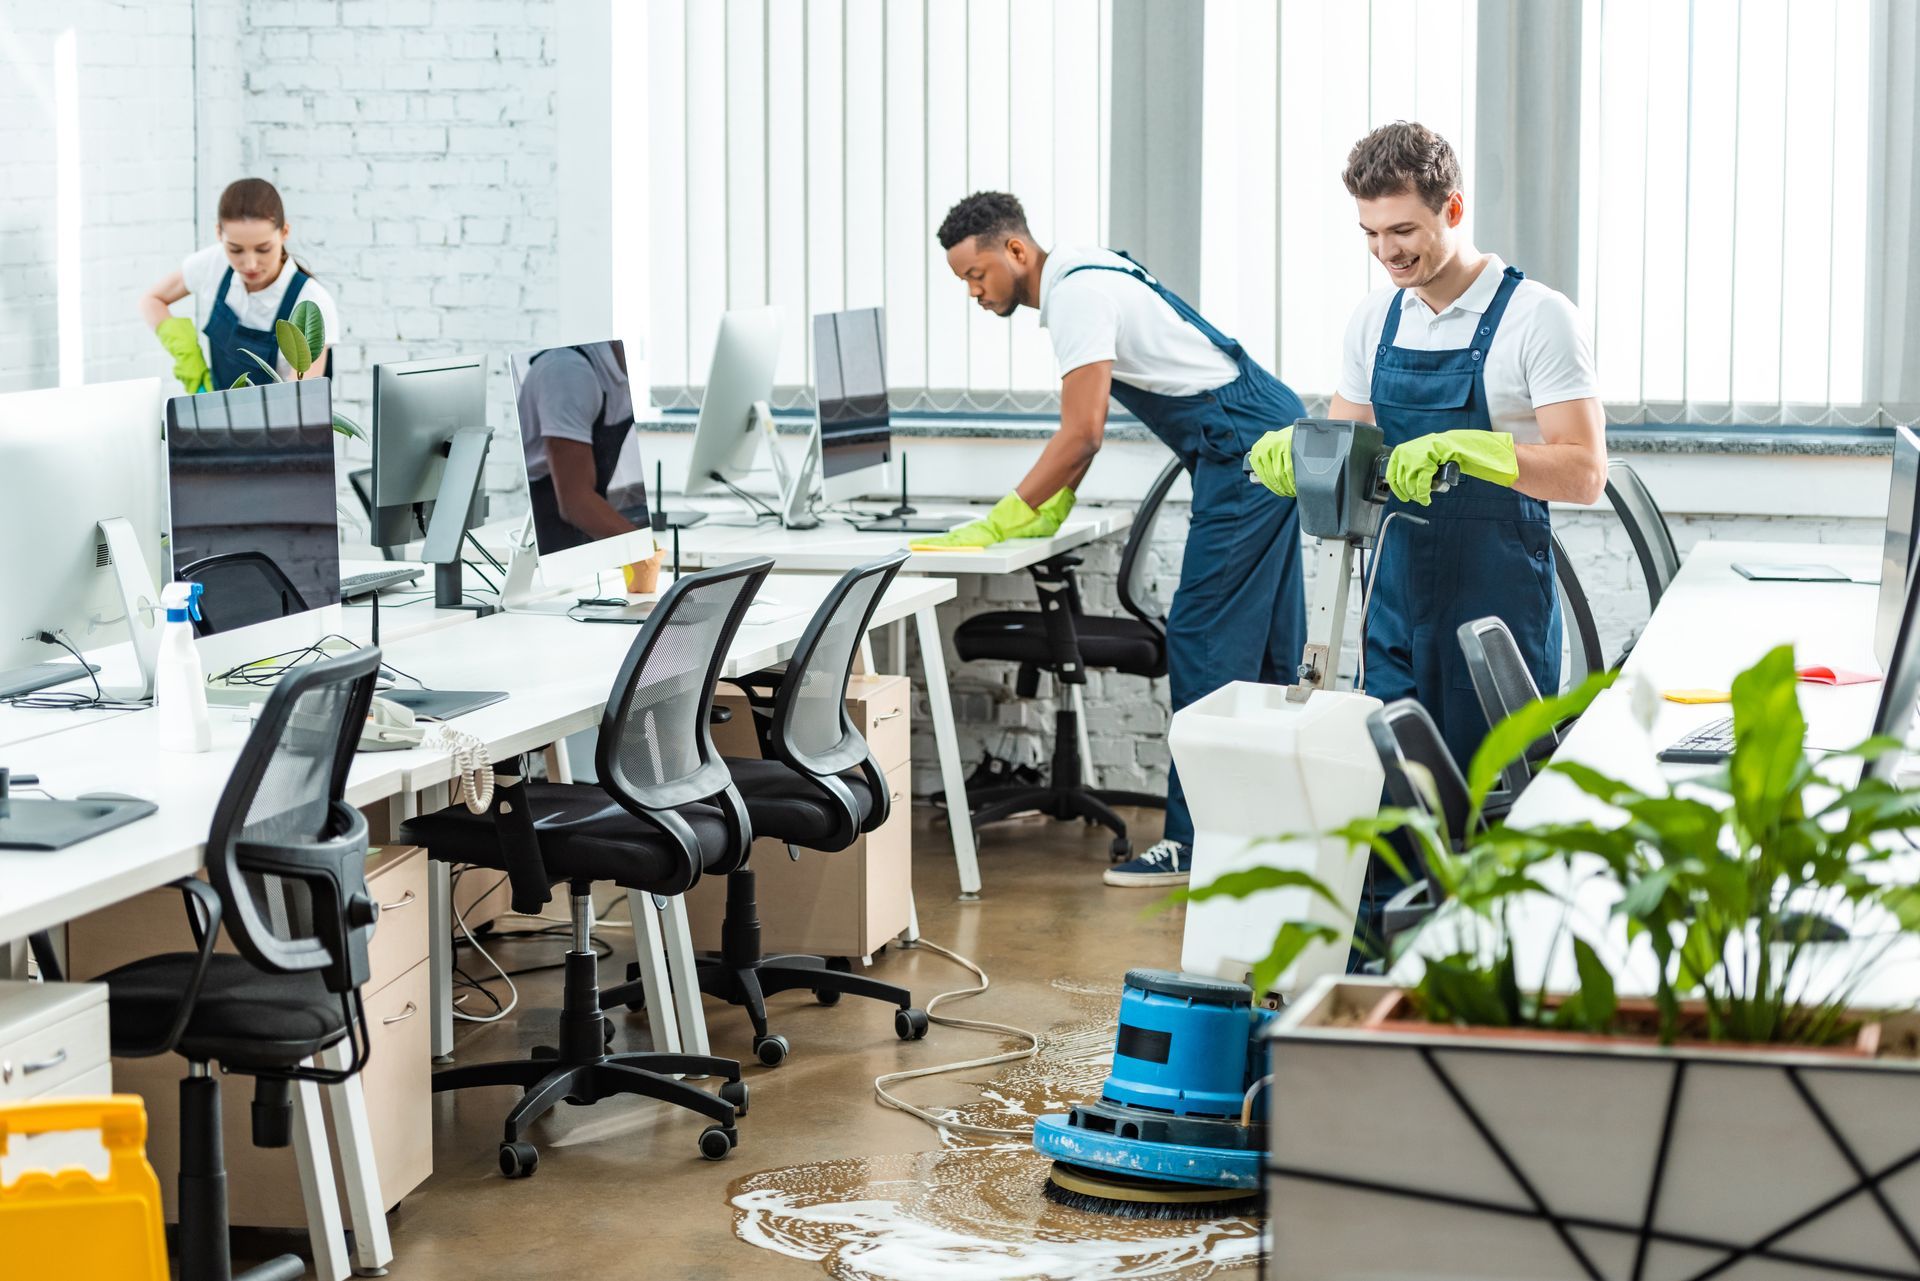 The professional cleaners are cleaning an office space, including desks and floors.